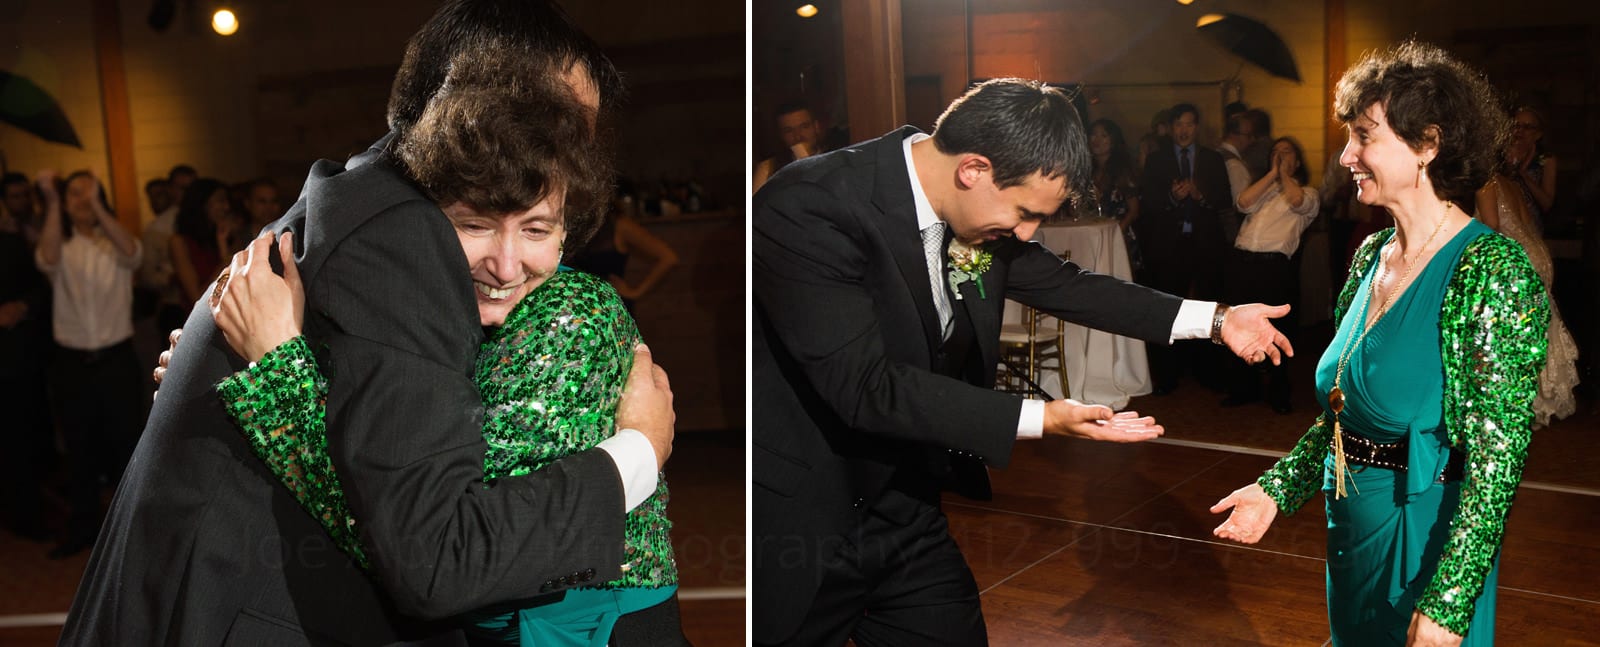 A groom embraces his mother as they dance. She's wearing a green sparkly dress.